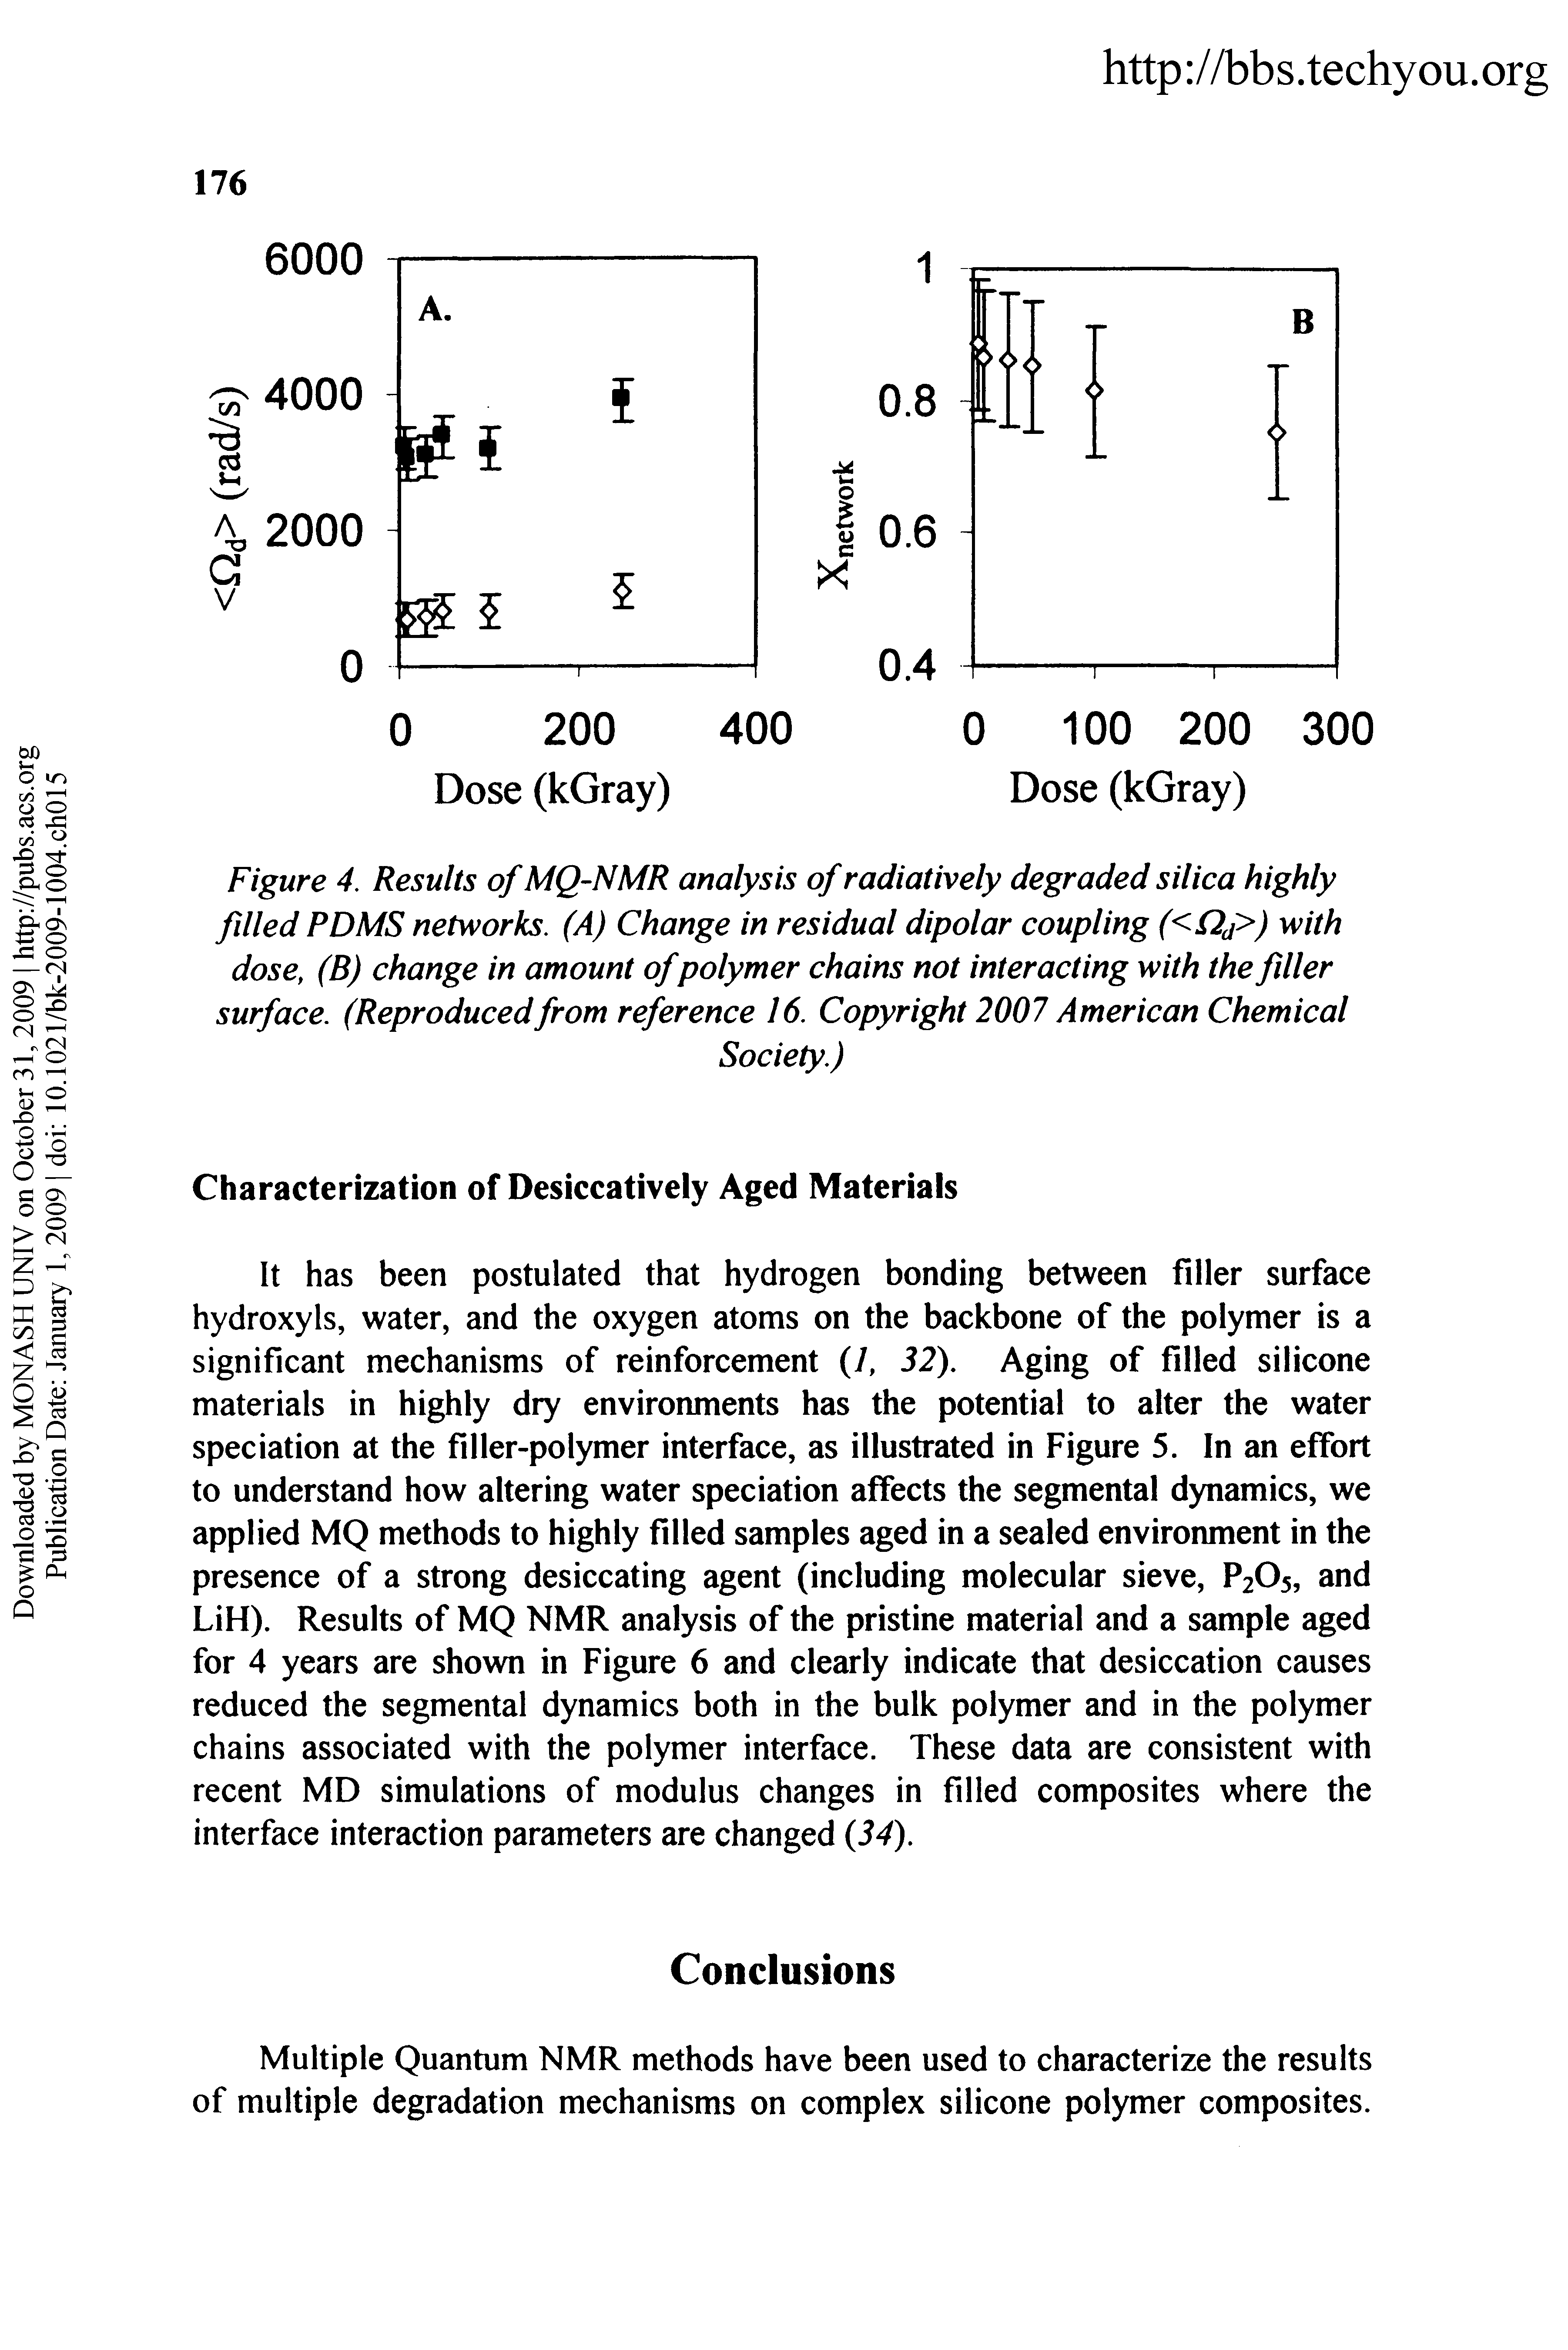 Figure 4. Results of MQ-NMR analysis of radiatively degraded silica highly filled PDMS networks. (A) Change in residual dipolar coupling (<C2d>) dose, (B) change in amount ofpolymer chains not interacting with the filler surface. (Reproducedfrom reference 16. Copyright 2007 American Chemical...